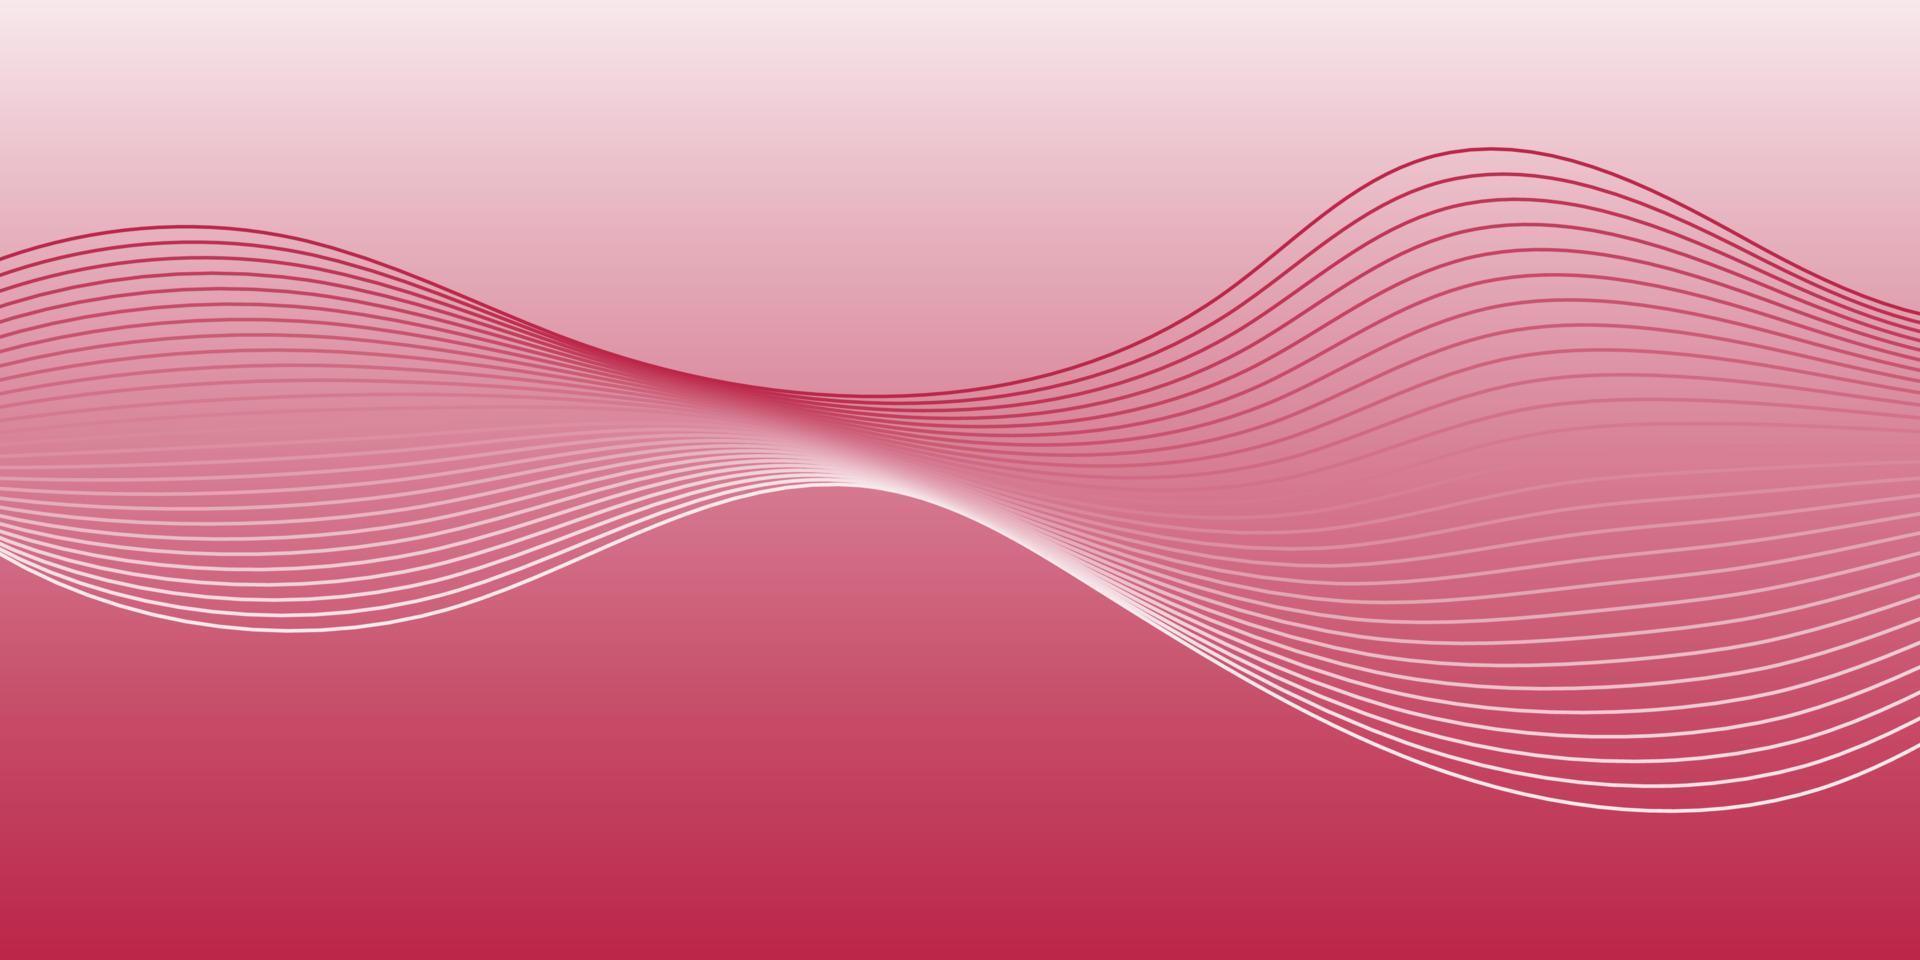 Viva Magenta background. Abstract wave. Curved wavy line, smooth stripe. Red, deep pink, raspberry gradient color. Vector horizontal illustration.